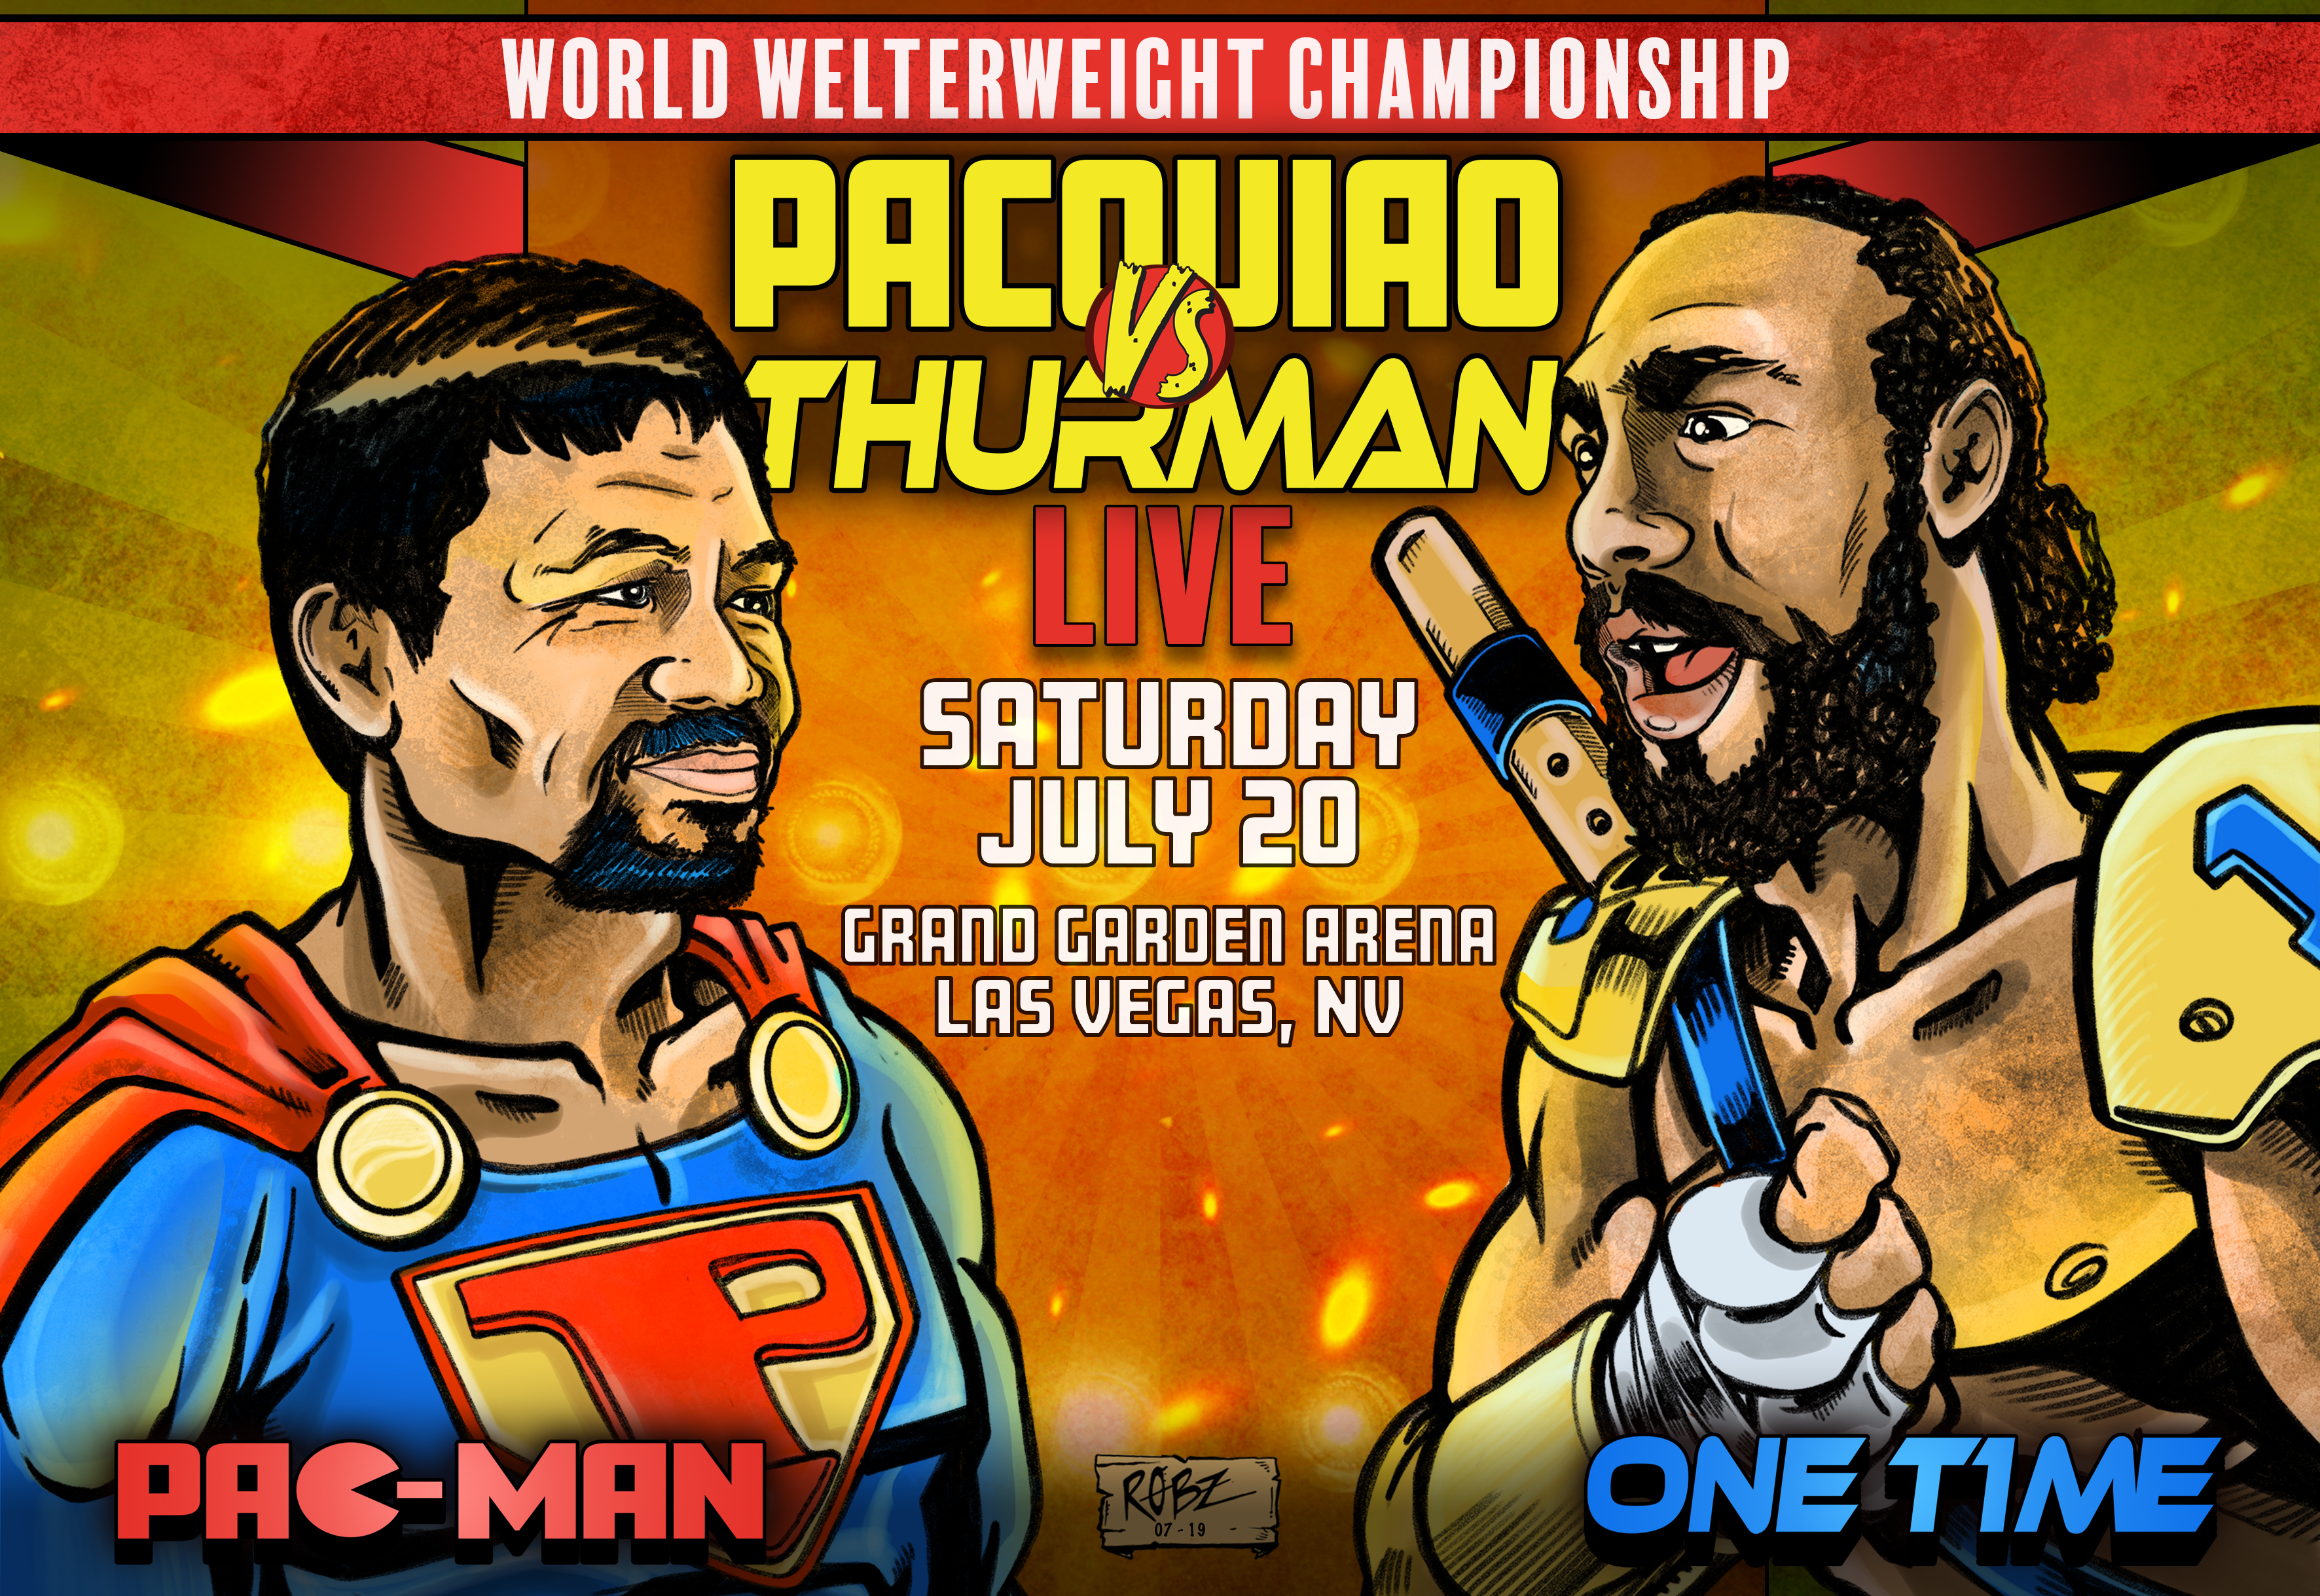 Pac-man VS One Time - Who Wins this Welterweight War?!